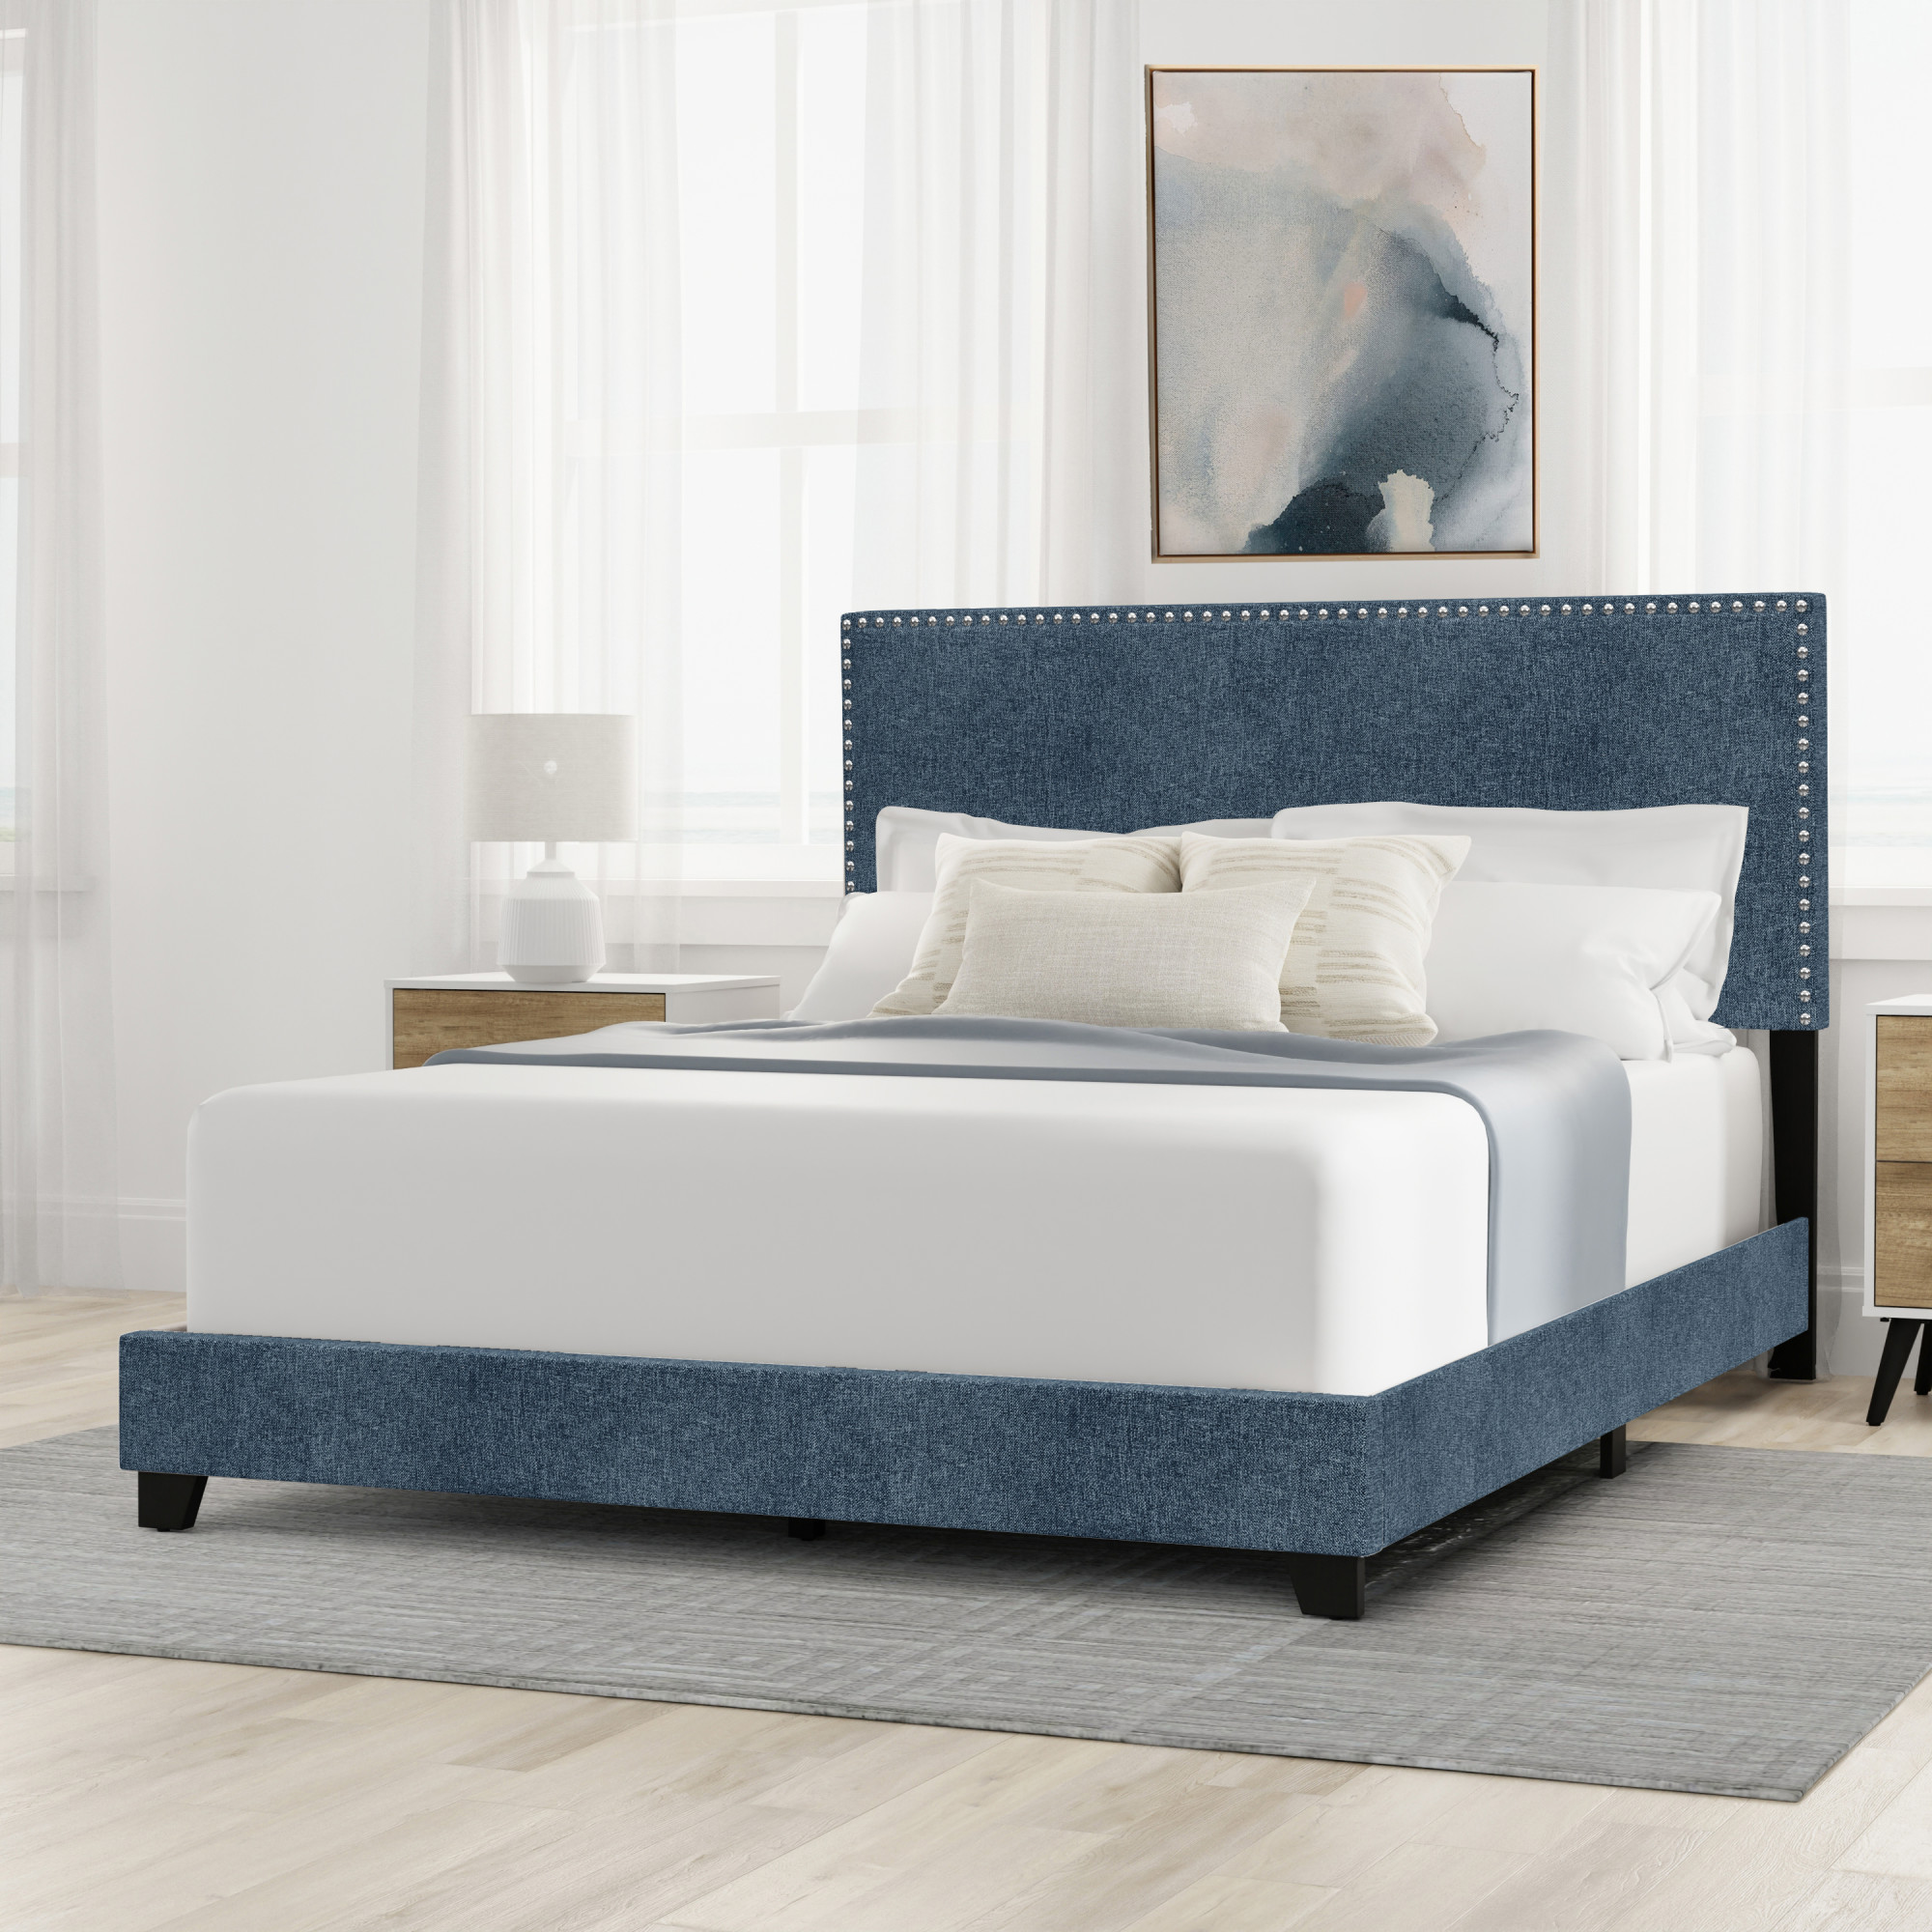 Willow Nailhead Trim Upholstered Queen Bed, Denim Fabric - image 5 of 17